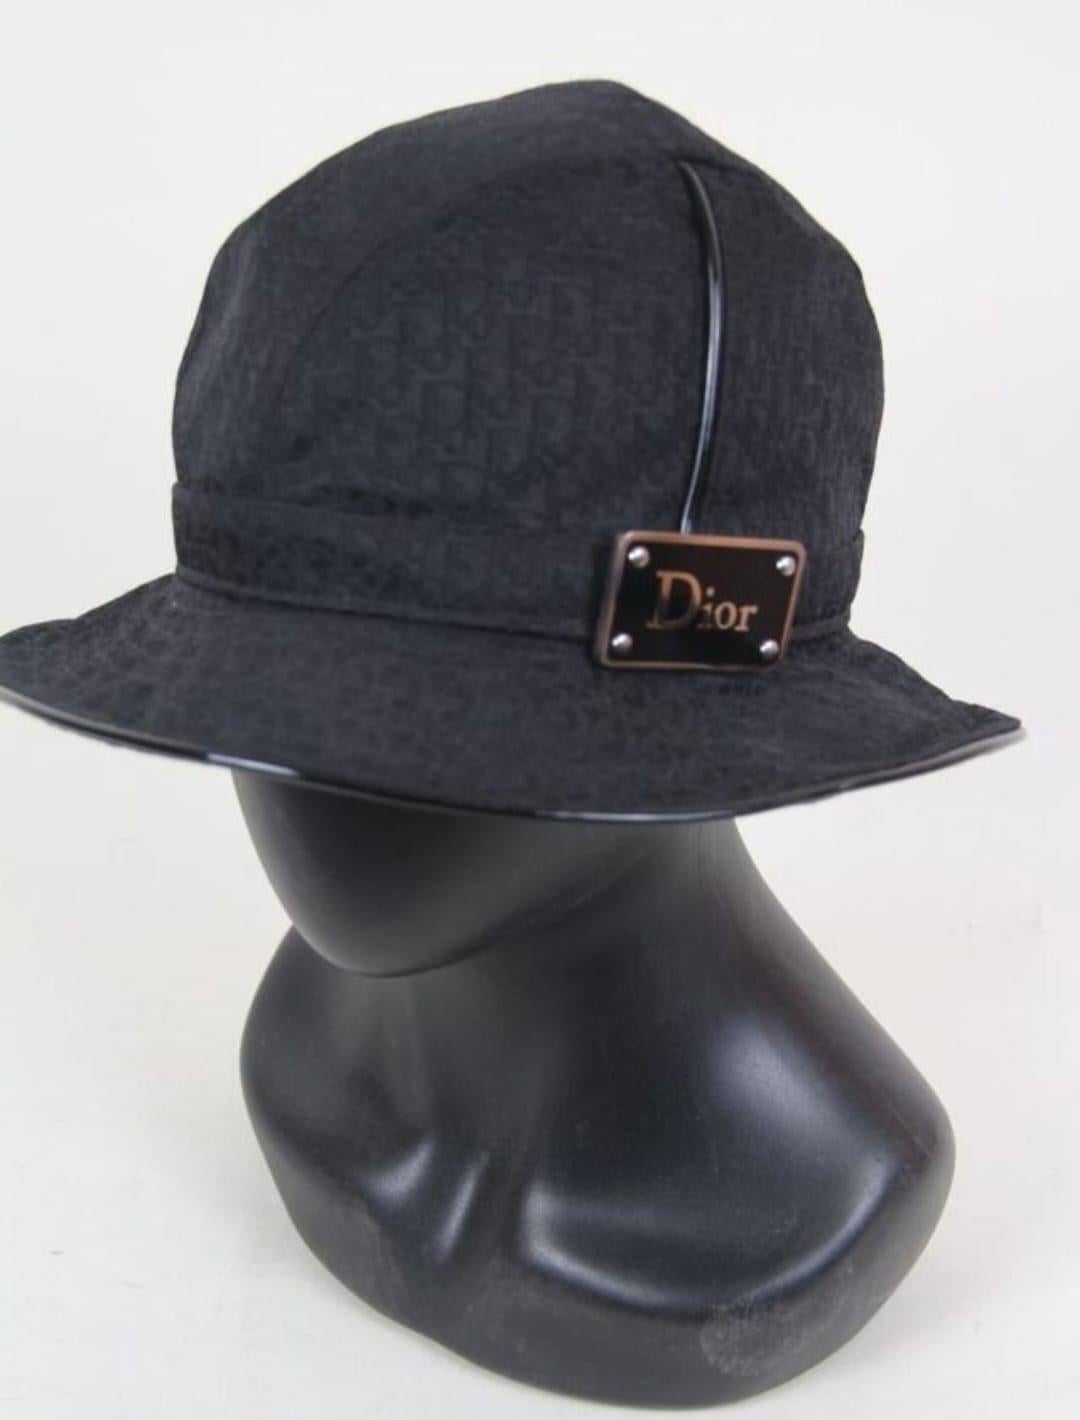 Christian Dior by Galliano Diorissimo Logo Bucket Hat 2004 SZ 56  In Excellent Condition For Sale In Алматинский Почтамт, KZ